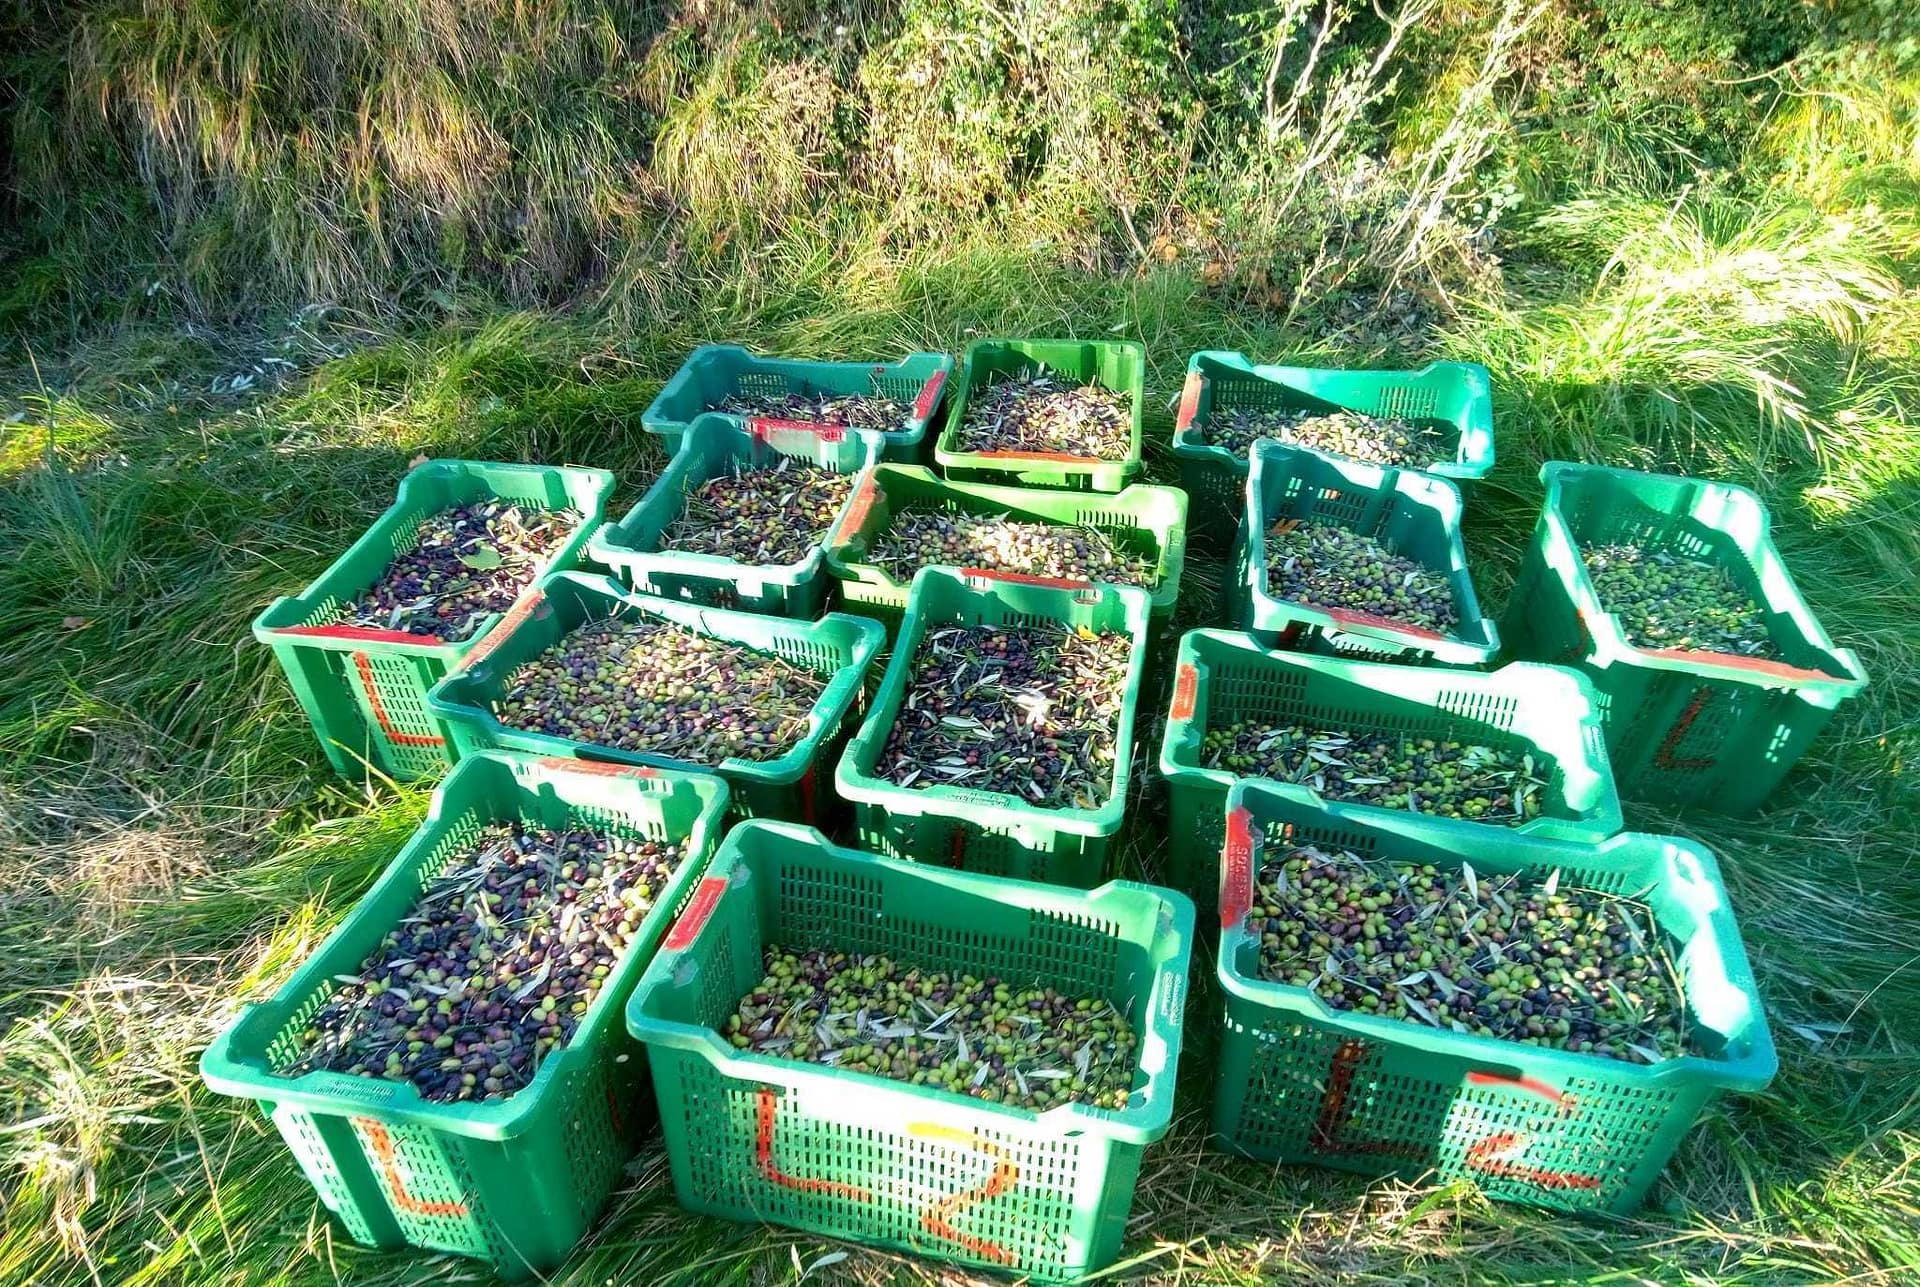 business-europe-production-world-on-shores-of-lake-garda-volunteers-harvest-abandoned-trees-for-charity-olive-oil-times